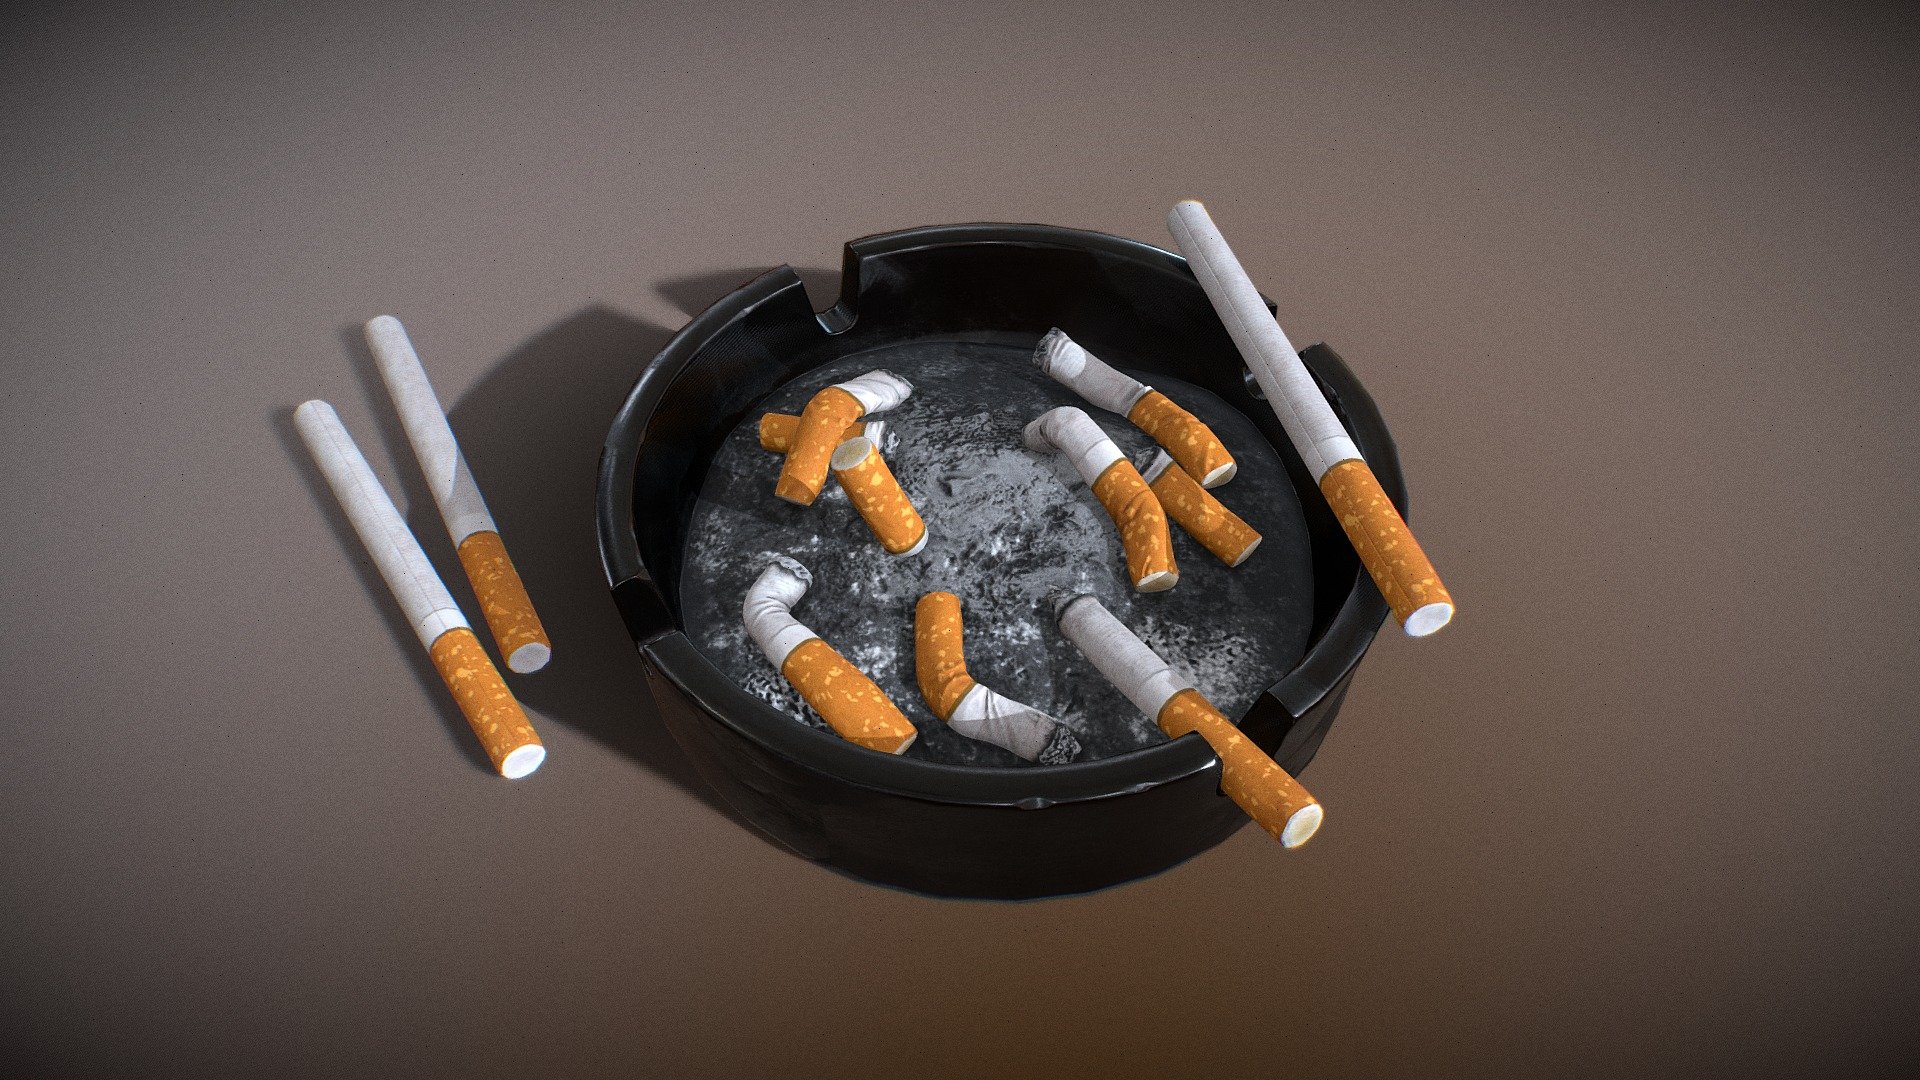 Modeling of an Ashtray with Cigarettes. Using 1 set of 4K textures. Any feedback is appreciated! - Ashtray with Cigarettes - Download Free 3D model by YJ_ 3d model